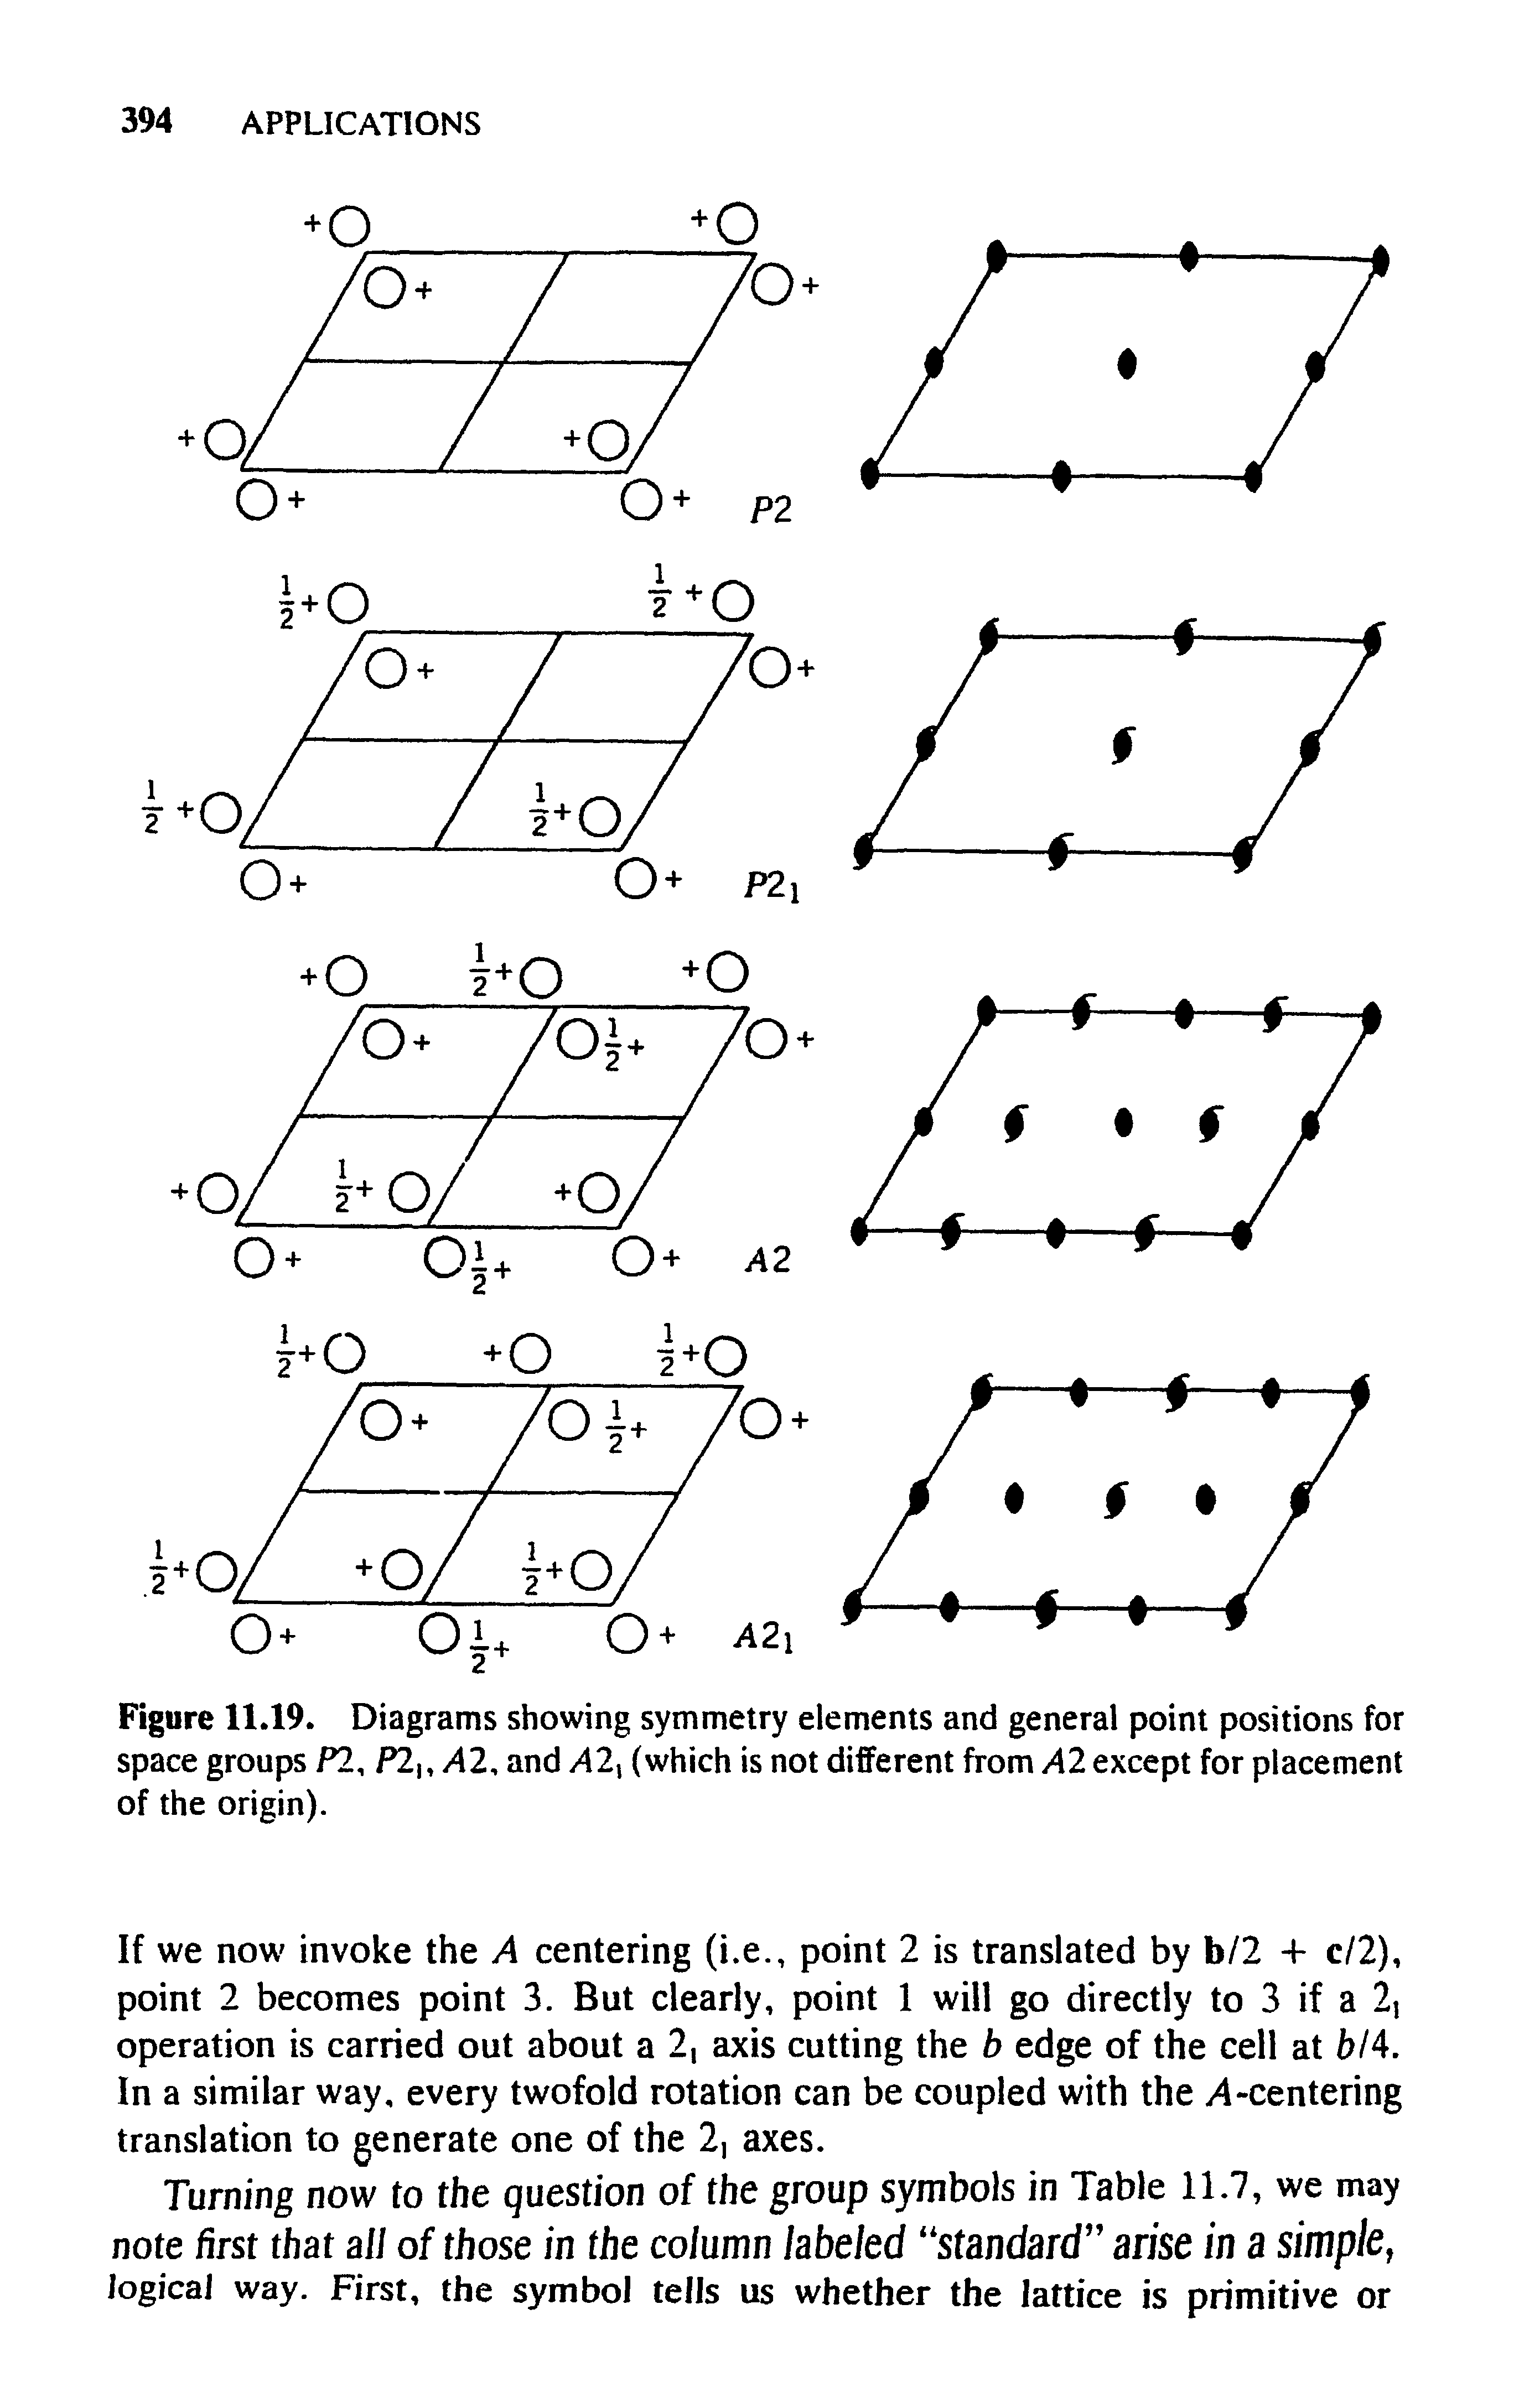 Figure 11.19. Diagrams showing symmetry elements and general point positions for space groups PI, P2, /42, and /42, (which is not different from A2 except for placement of the origin).